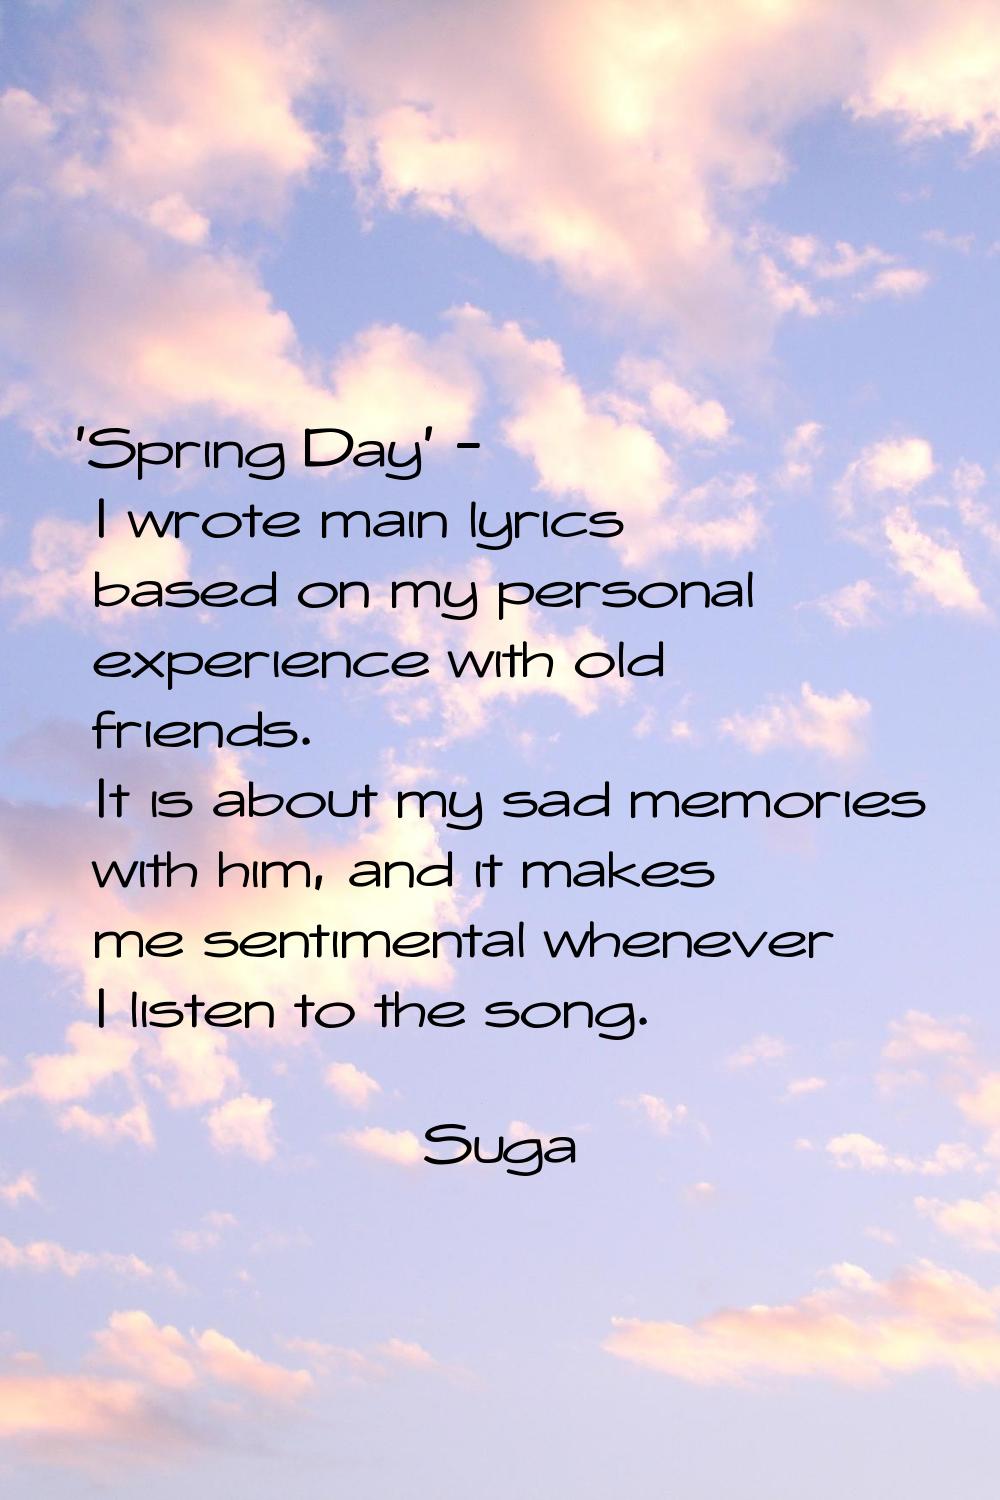 'Spring Day' - I wrote main lyrics based on my personal experience with old friends. It is about my